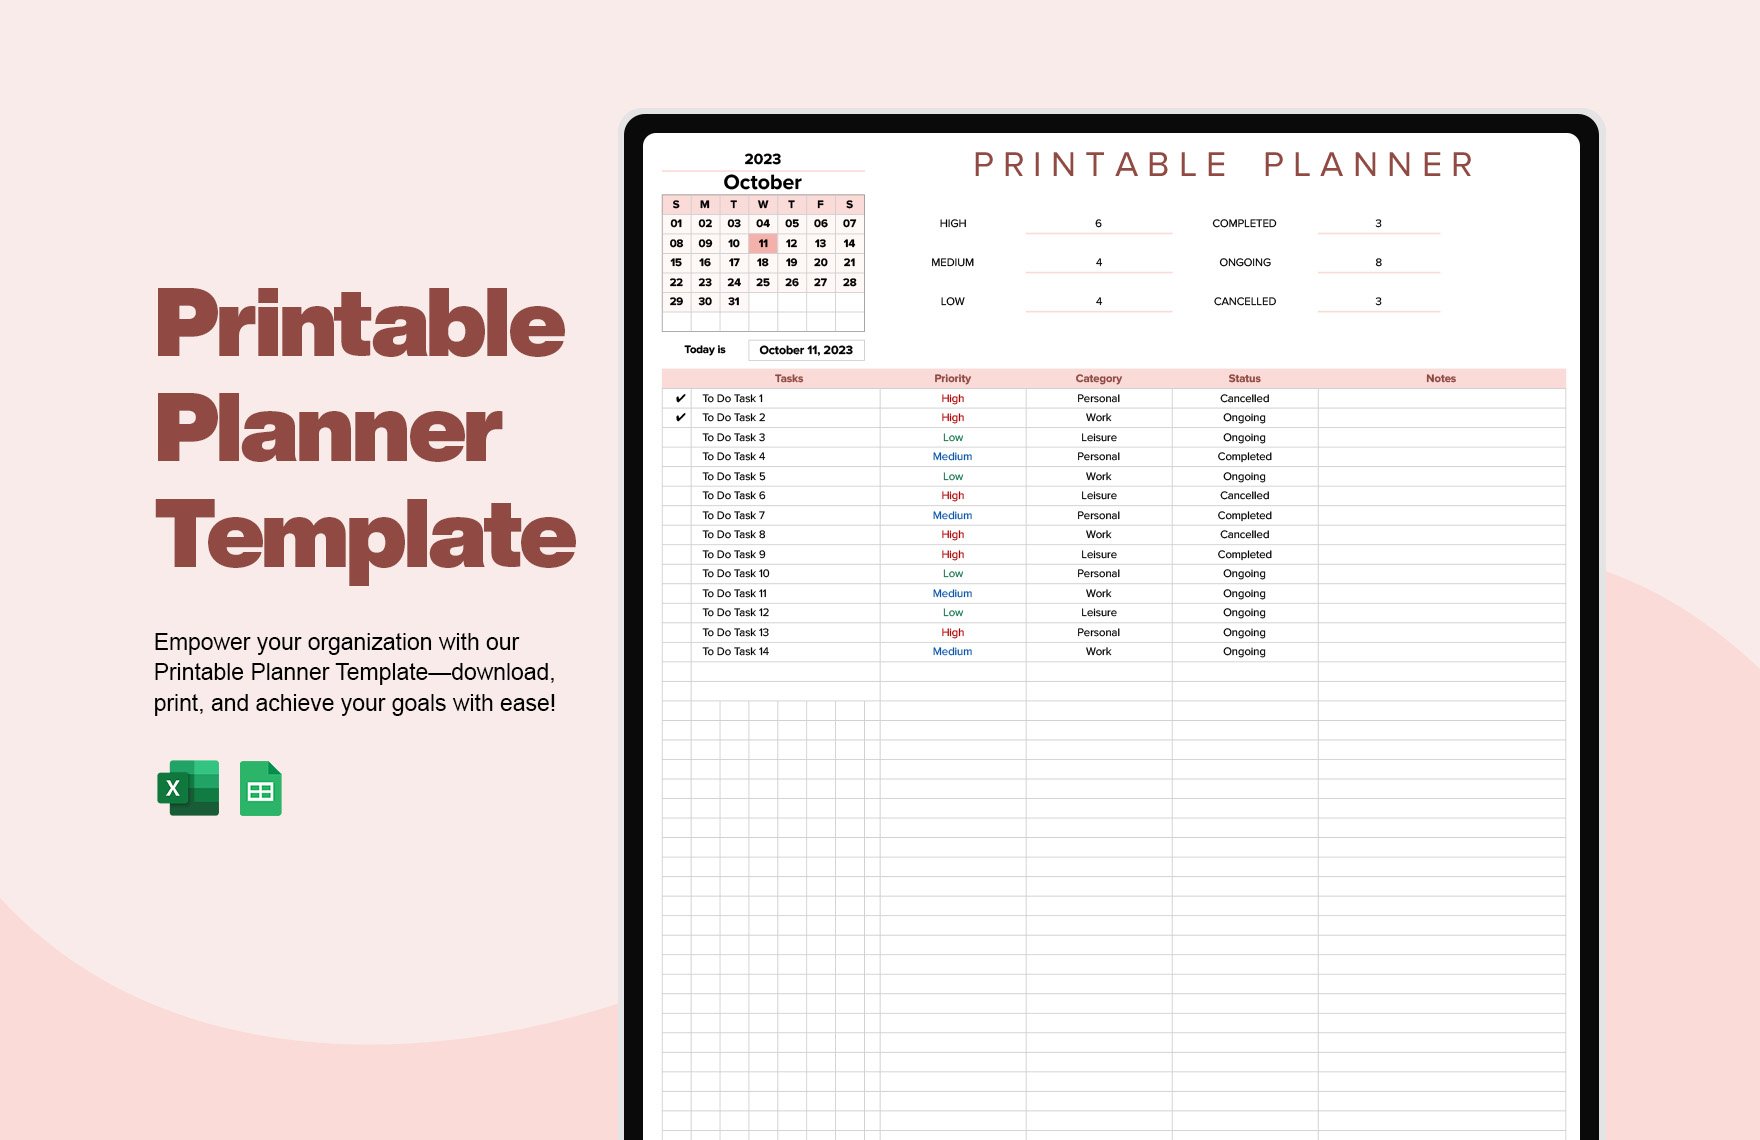 Free Printable Planner Template in Excel, Google Sheets